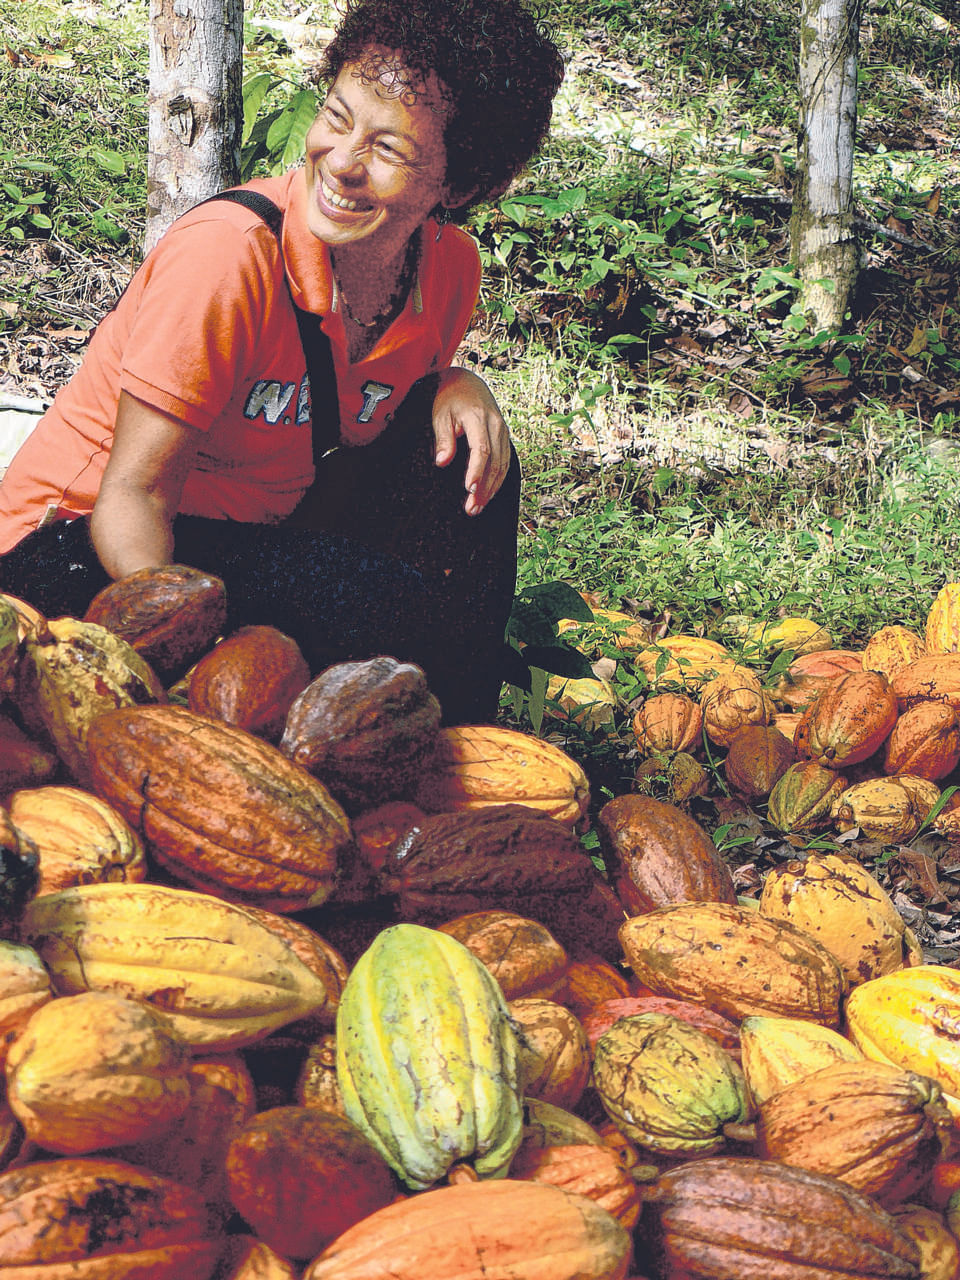 ForestFinance's cocoa forests in Panama. The firm invites investors to buy shares (that is, trees) in forests that are ethically and sustainably managed.